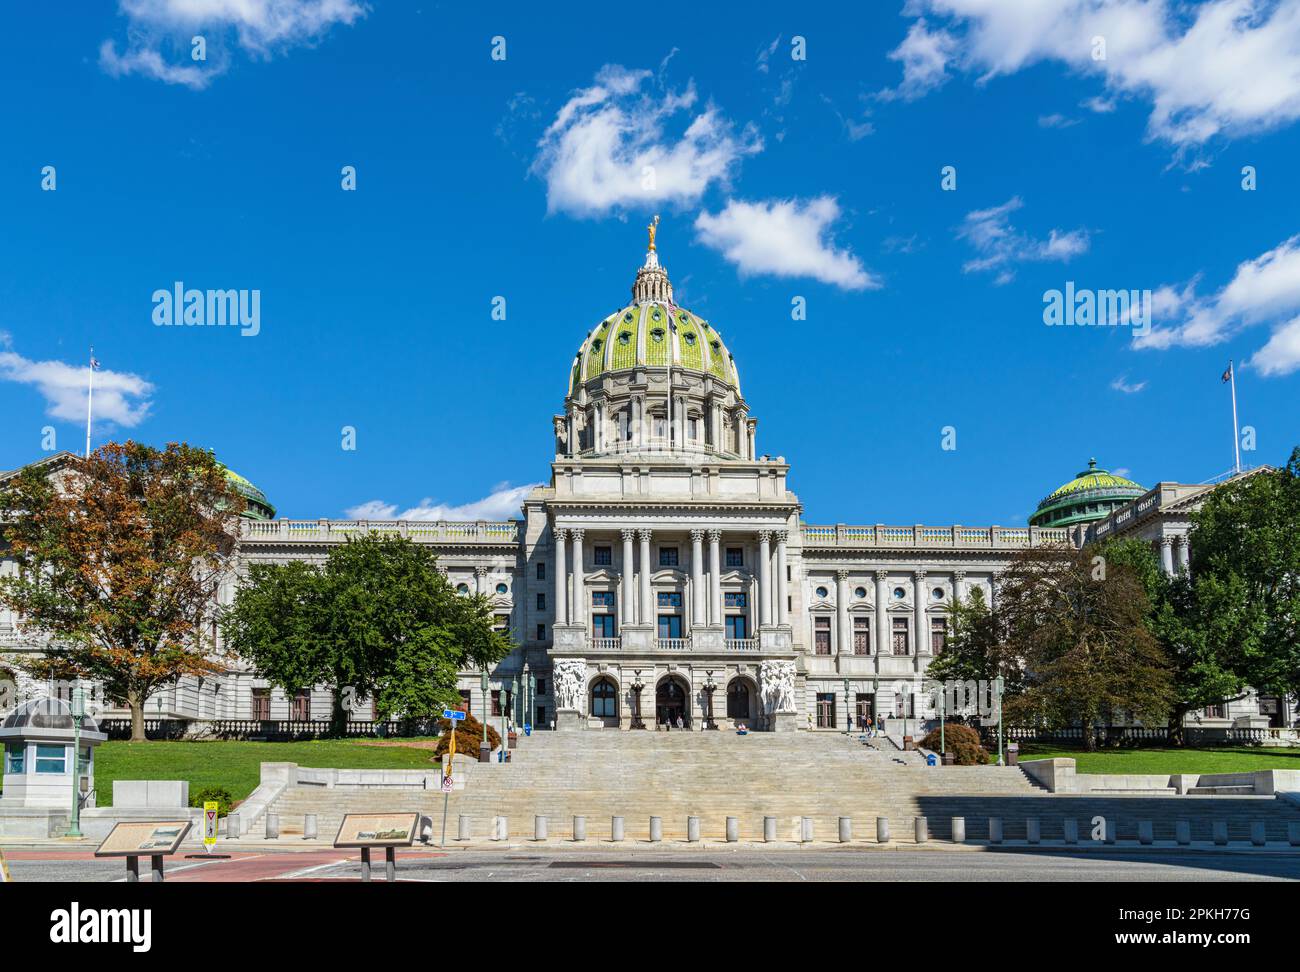 Harrisburg, PA - September 26, 2021: Wide angle view of the Beaux-Arts style Pennsylvania State Capitol building, Harrisburg, Pennsylvania, USA. Stock Photo